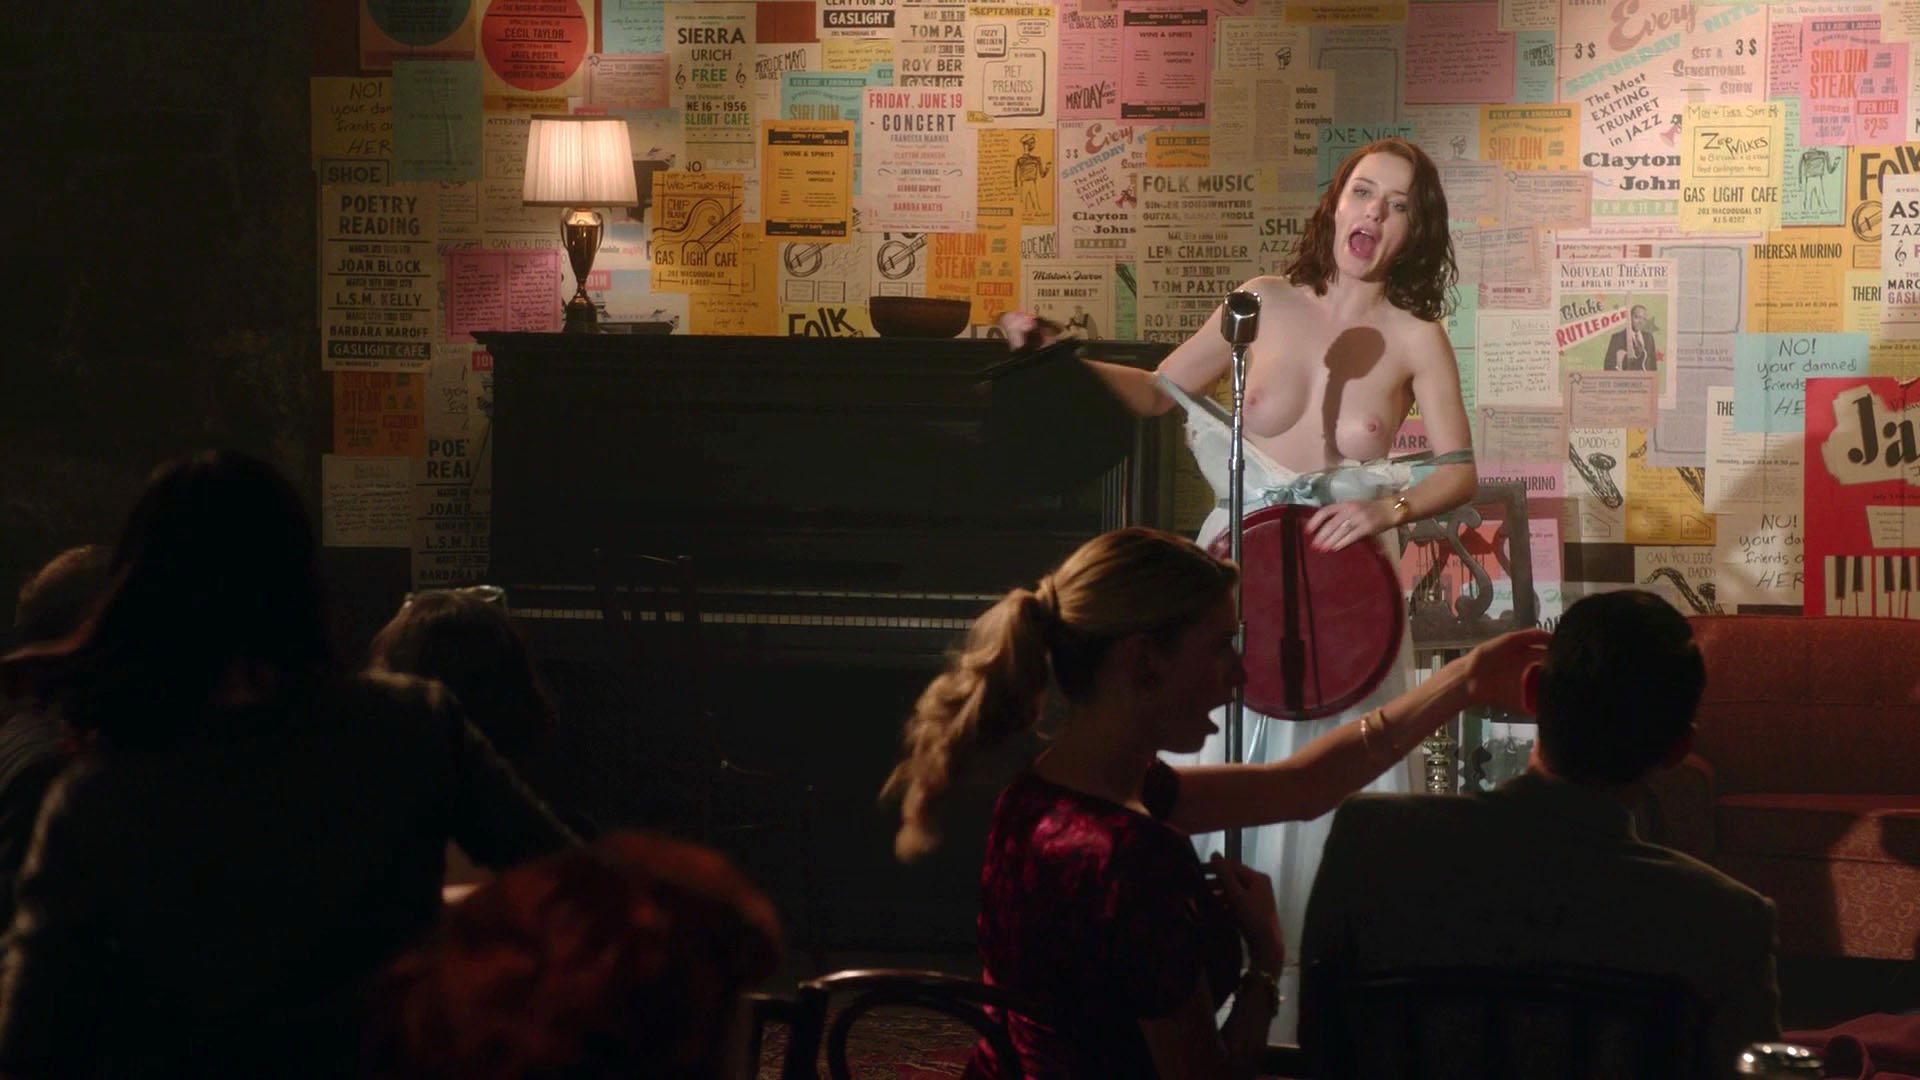 Mrs maisel topless